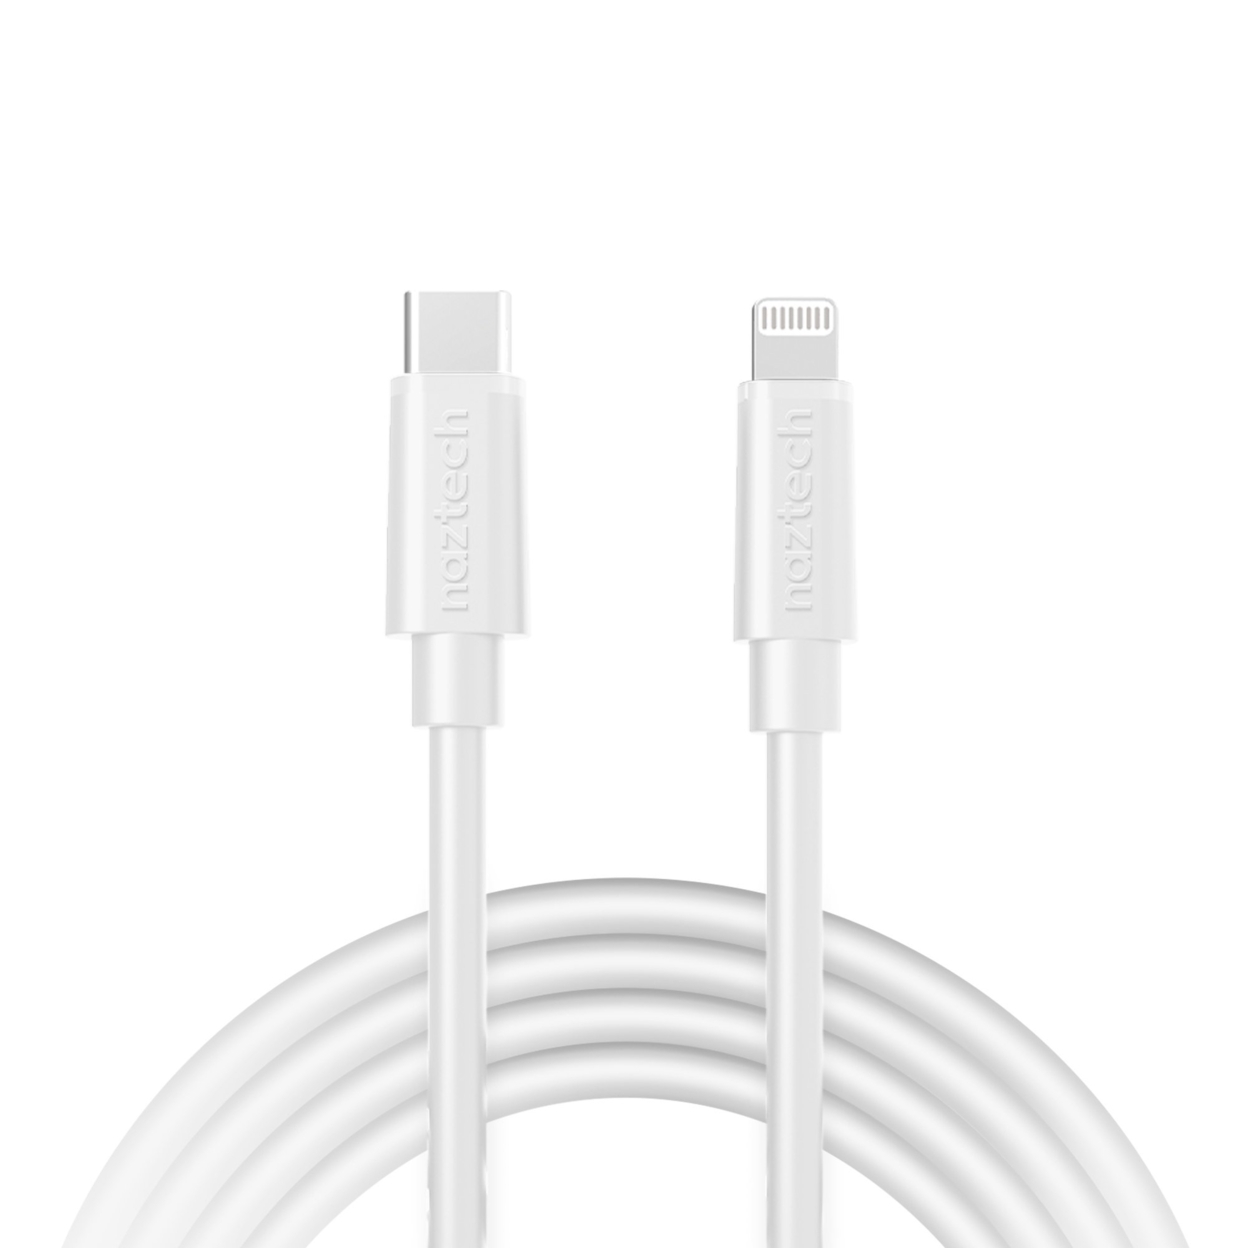 Naztech Fast Charge USB-C To MFi Lightning Cable 12ft (12FT-PRNT) - White